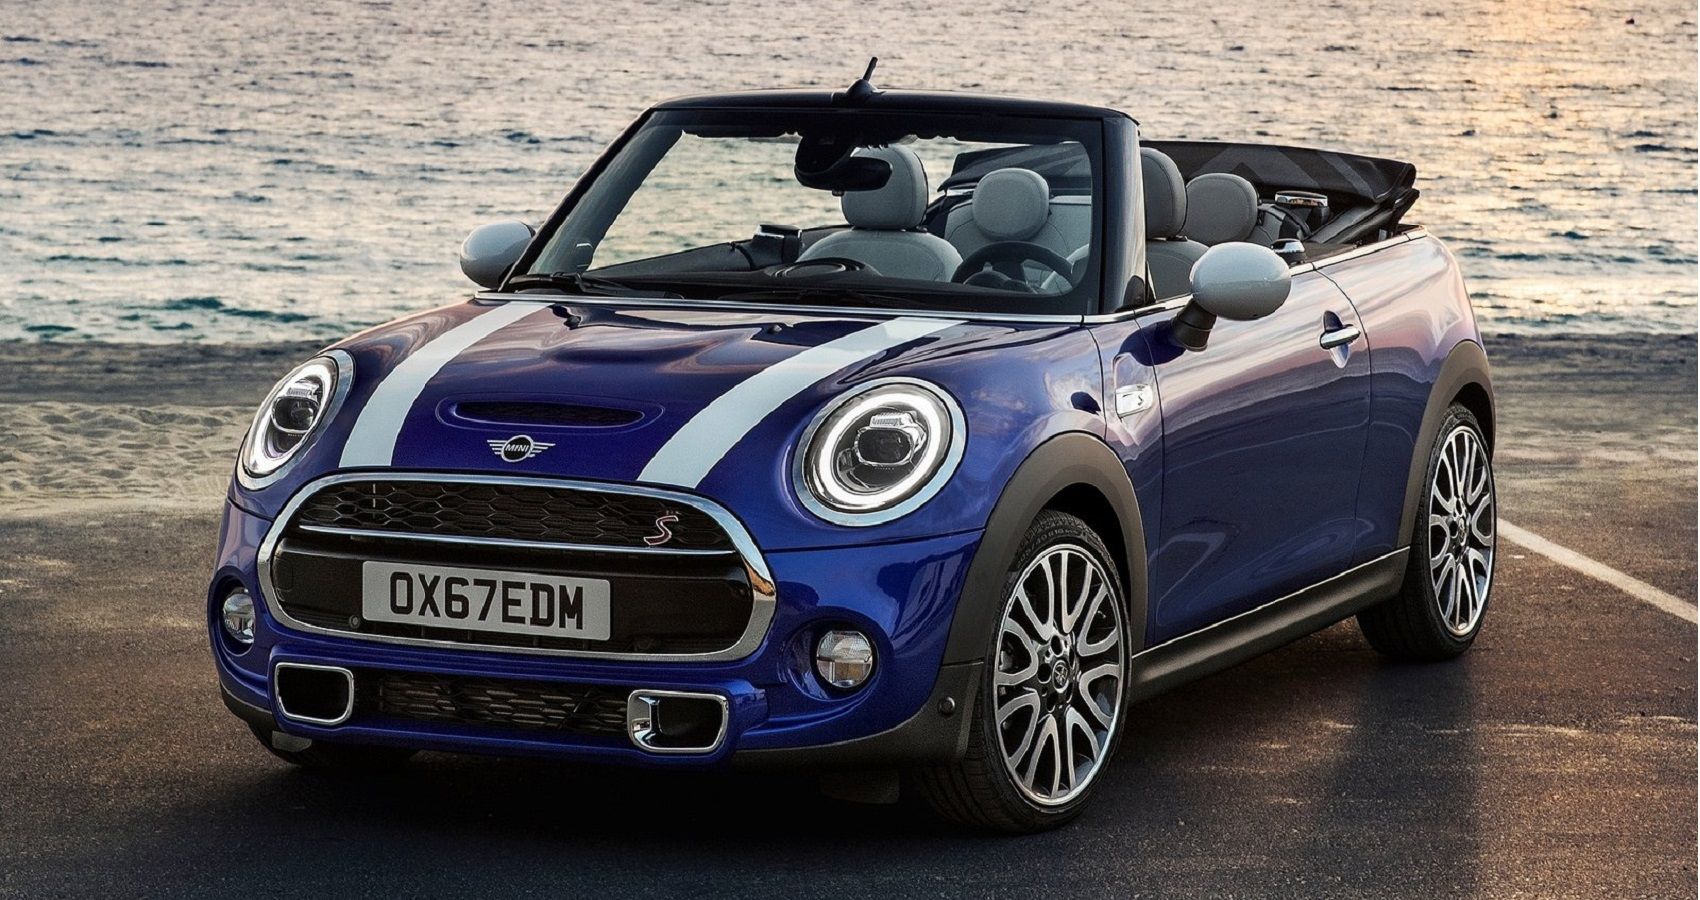 10 Terrible Convertibles You Shouldn't Waste Your Money On